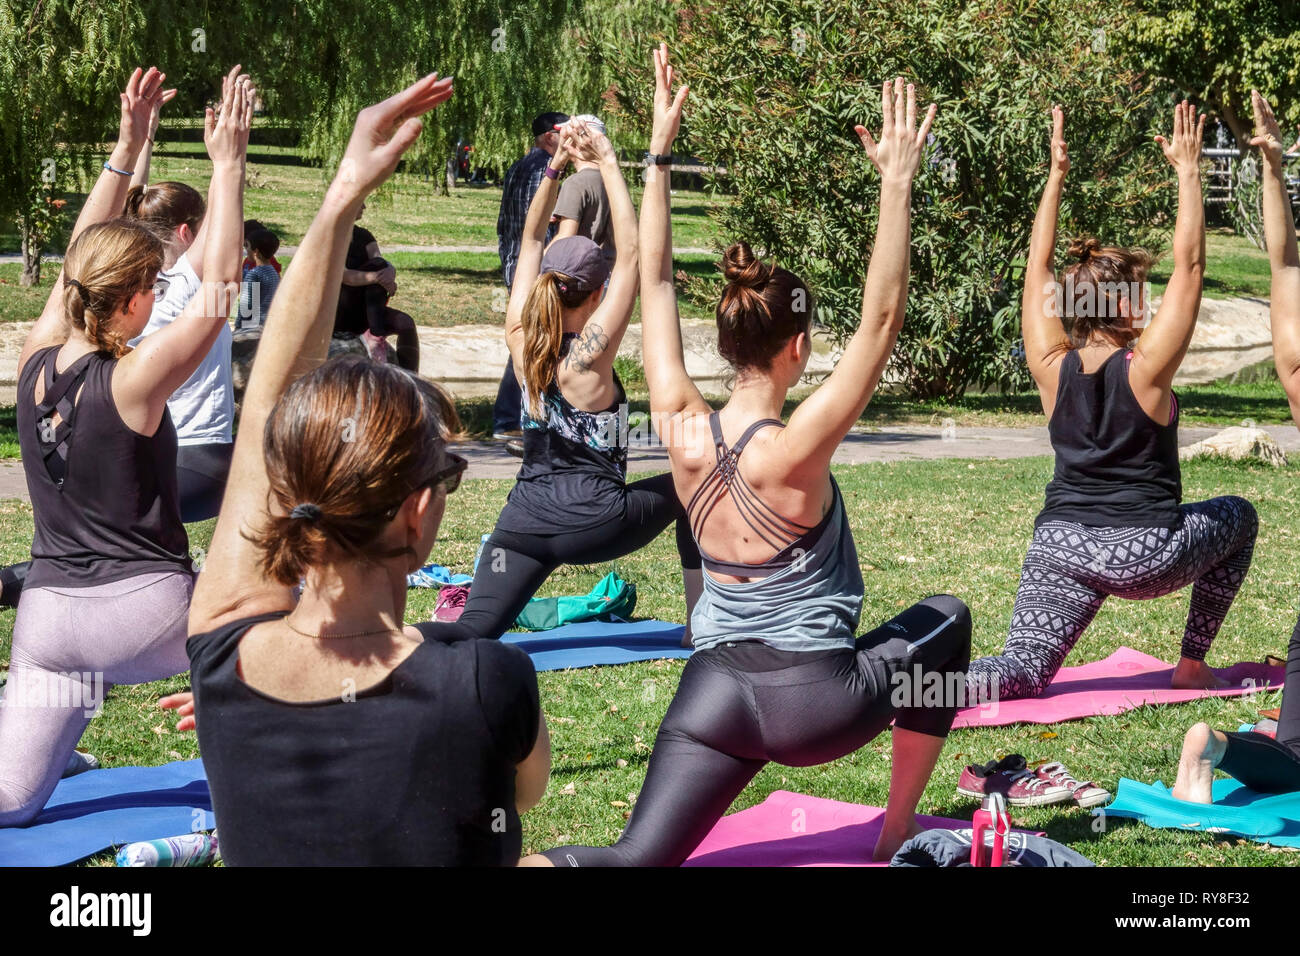 Valencia Turia Park, people, women are meeting and practice in the city park on fresh air, Valencia Spain yoga class group fitness healthy lifestyle Stock Photo